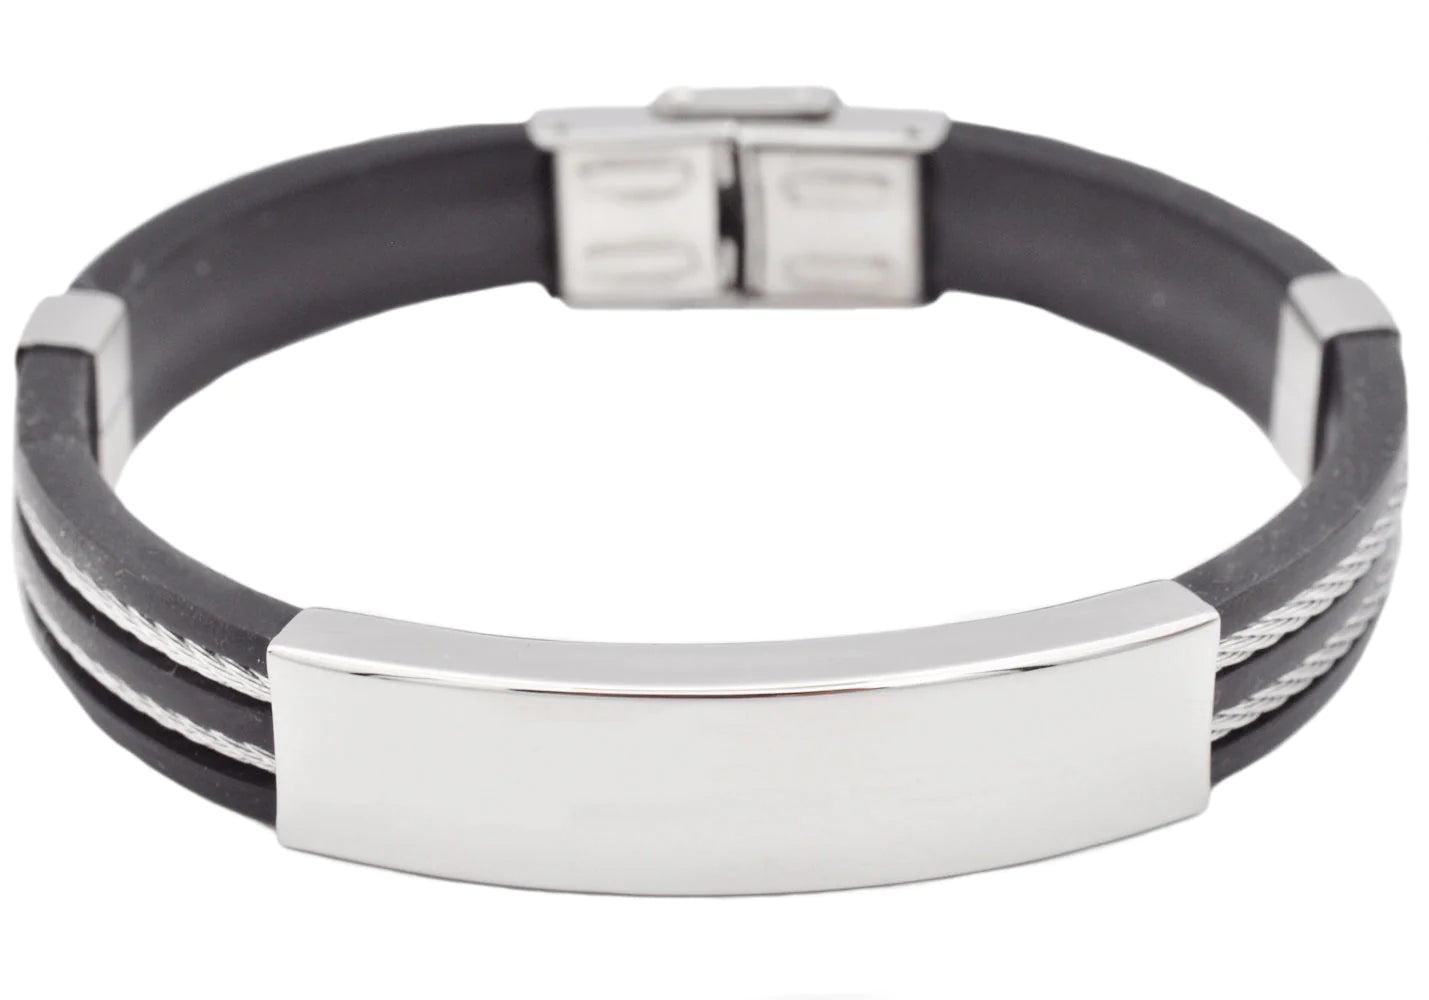 black silicone and stainless steel men's blackjack jewelry bracelet. 8.5 inches in length and 10 mm in width. 